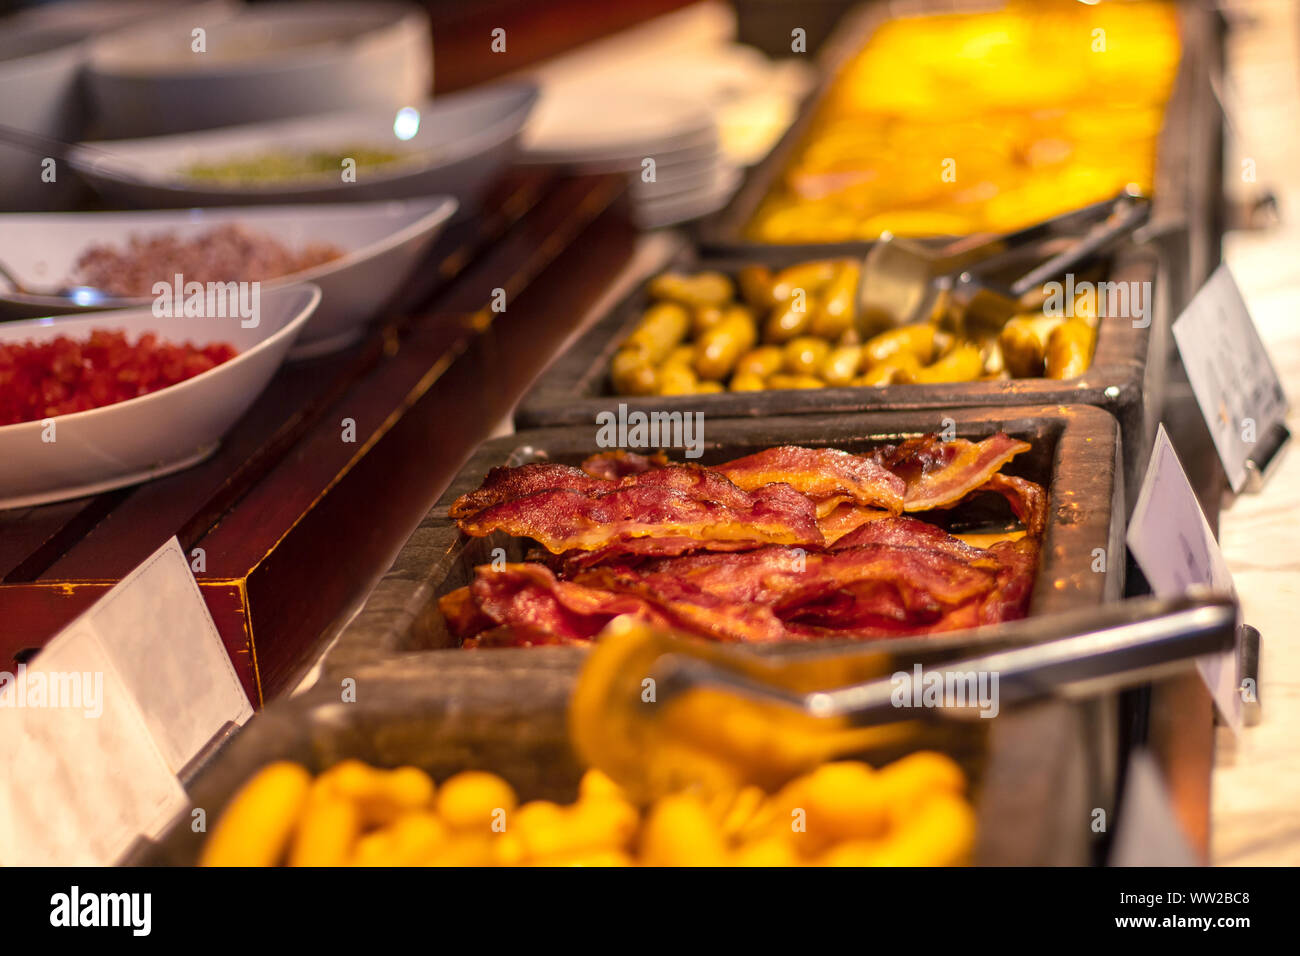 Buffet breakfast at a Chinese hotel. Closeup bacon on blurry background of food trays. Breakfast is included in the hotel. Stock Photo